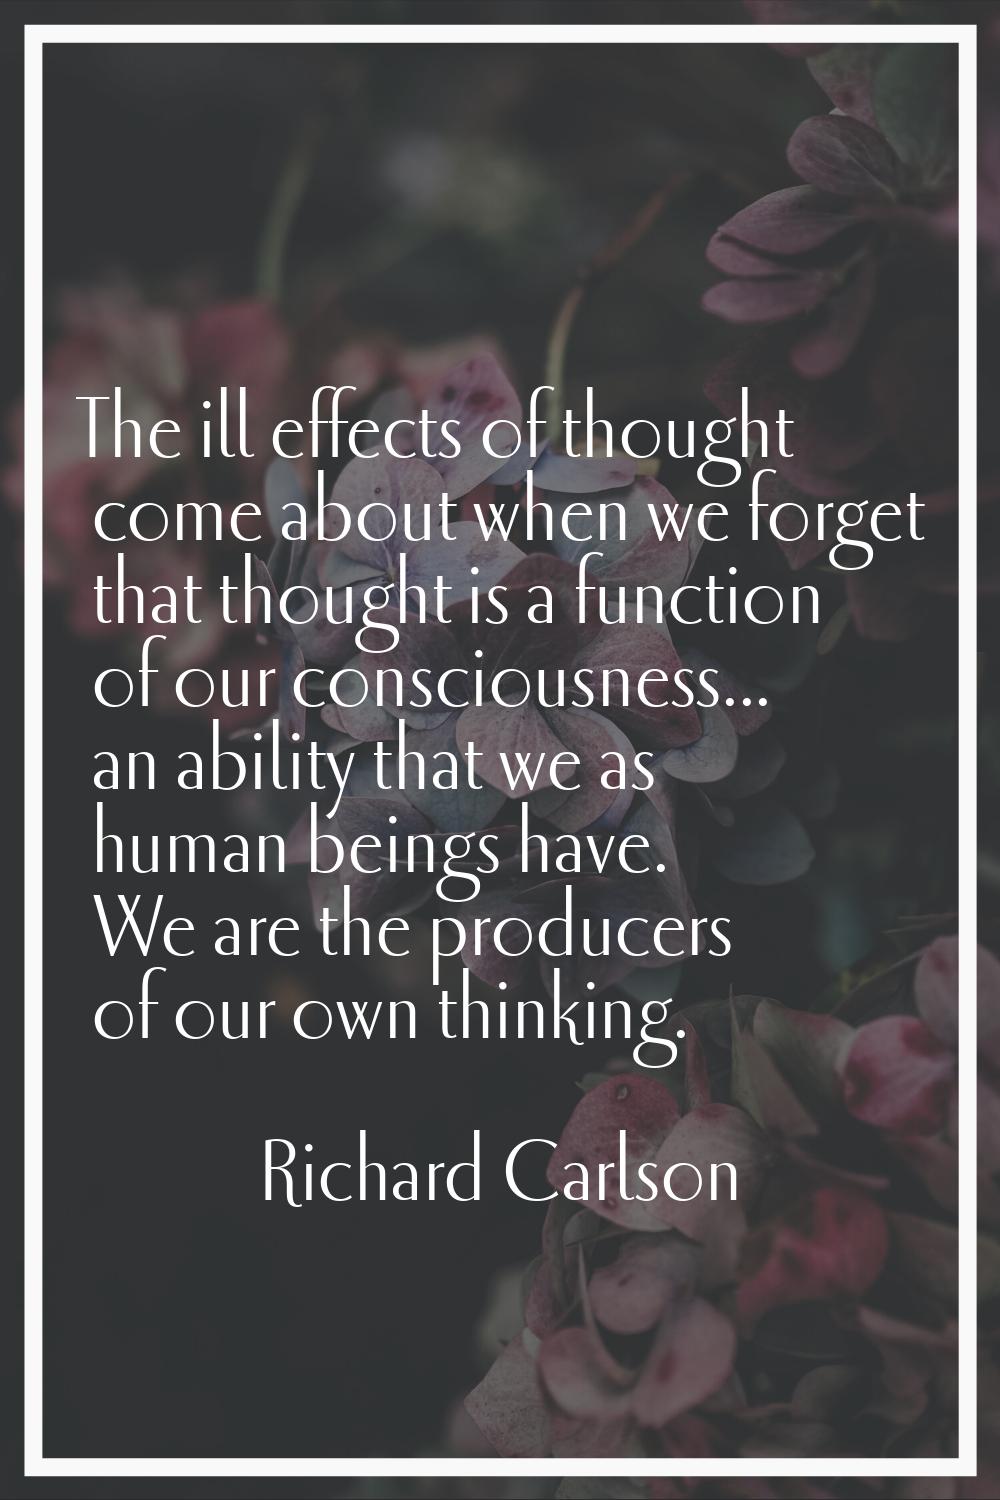 The ill effects of thought come about when we forget that thought is a function of our consciousnes